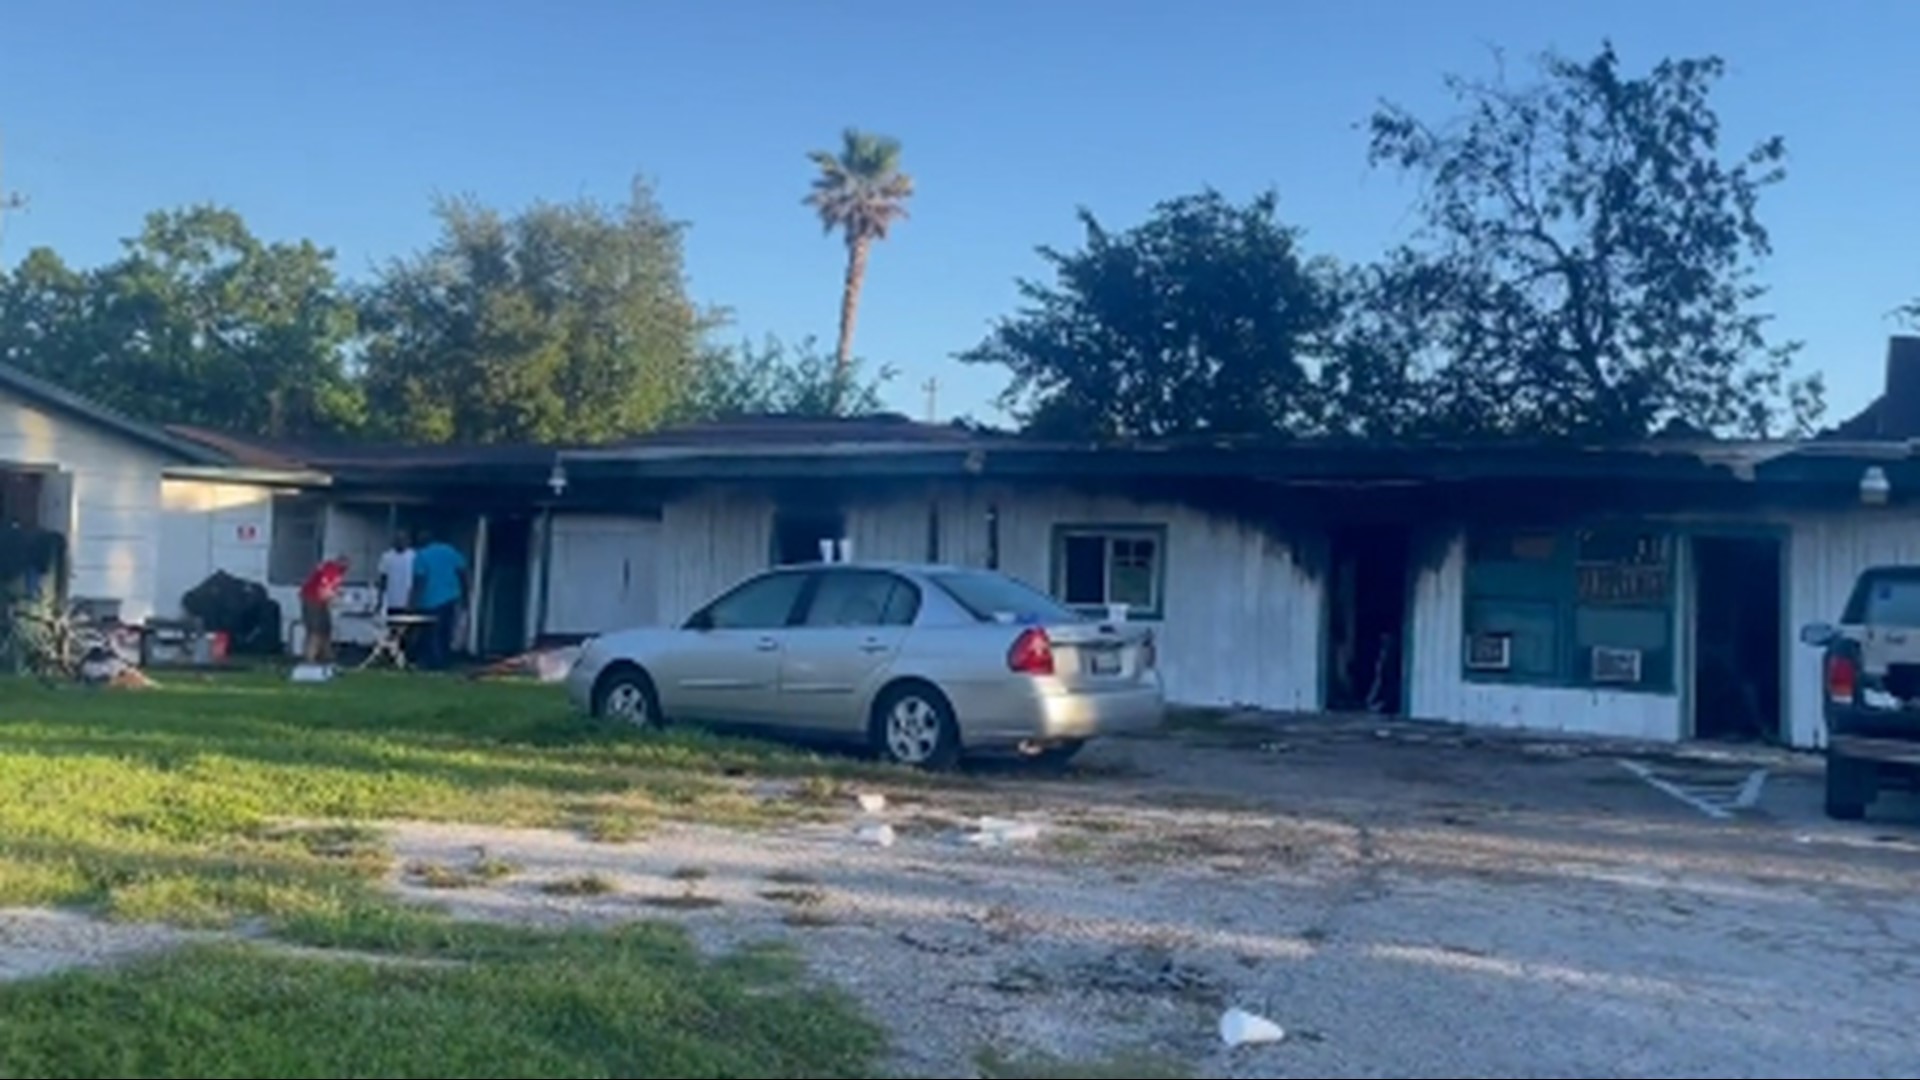 Four people are dead after police said a man set multiple fires at a residential complex early Sunday morning and then opened fire on the victims as they evacuated.